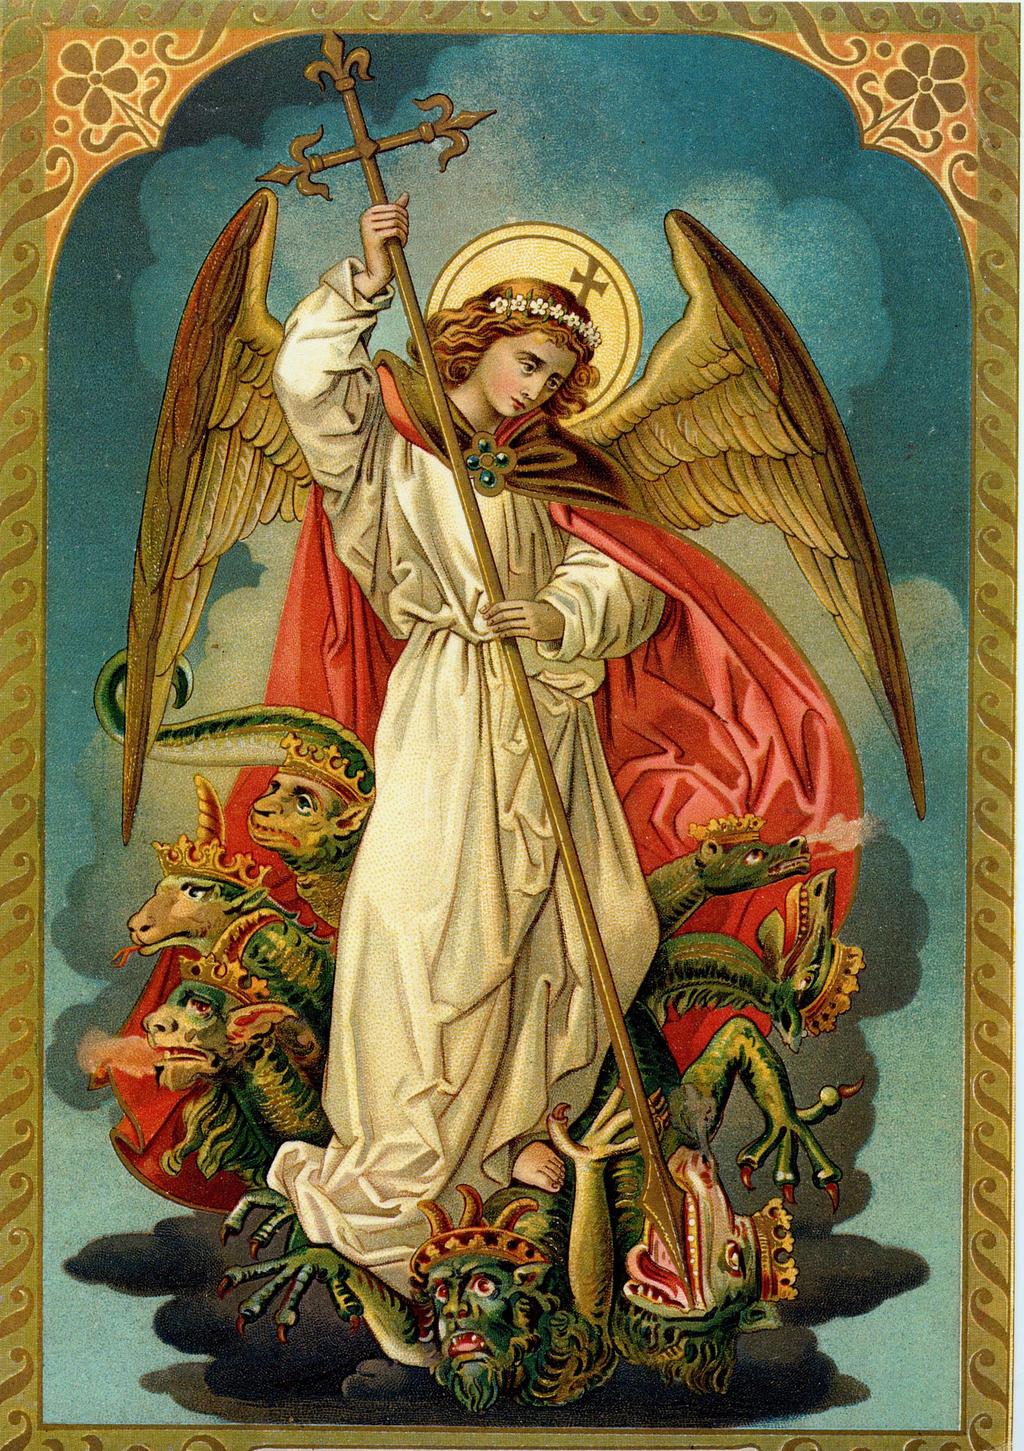 In the hour of my death call me And bid me come to Thee, That with Thy angels and saints I may praise Thee Forever and ever. Amen. Prayer to St.